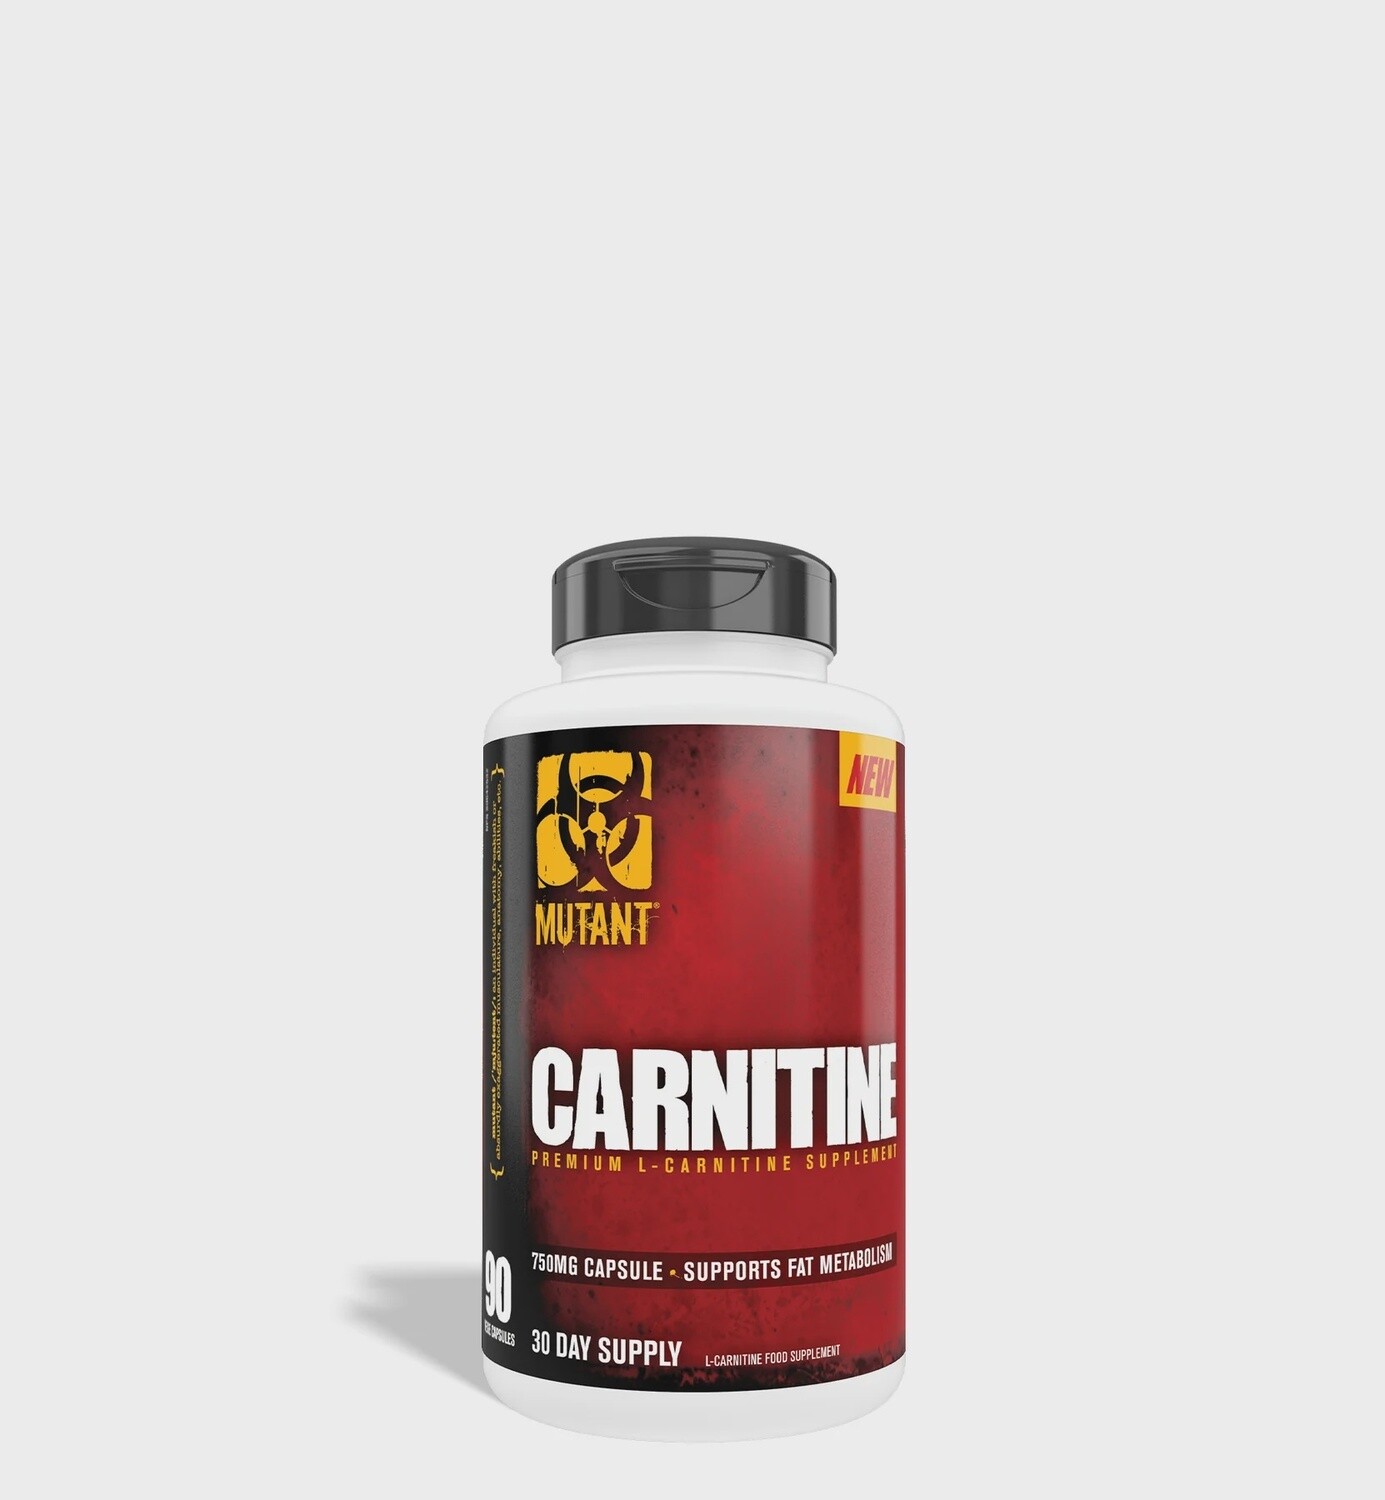 carnitine, Size: 90 Vegetarian Capsules, flavour: Unflavored